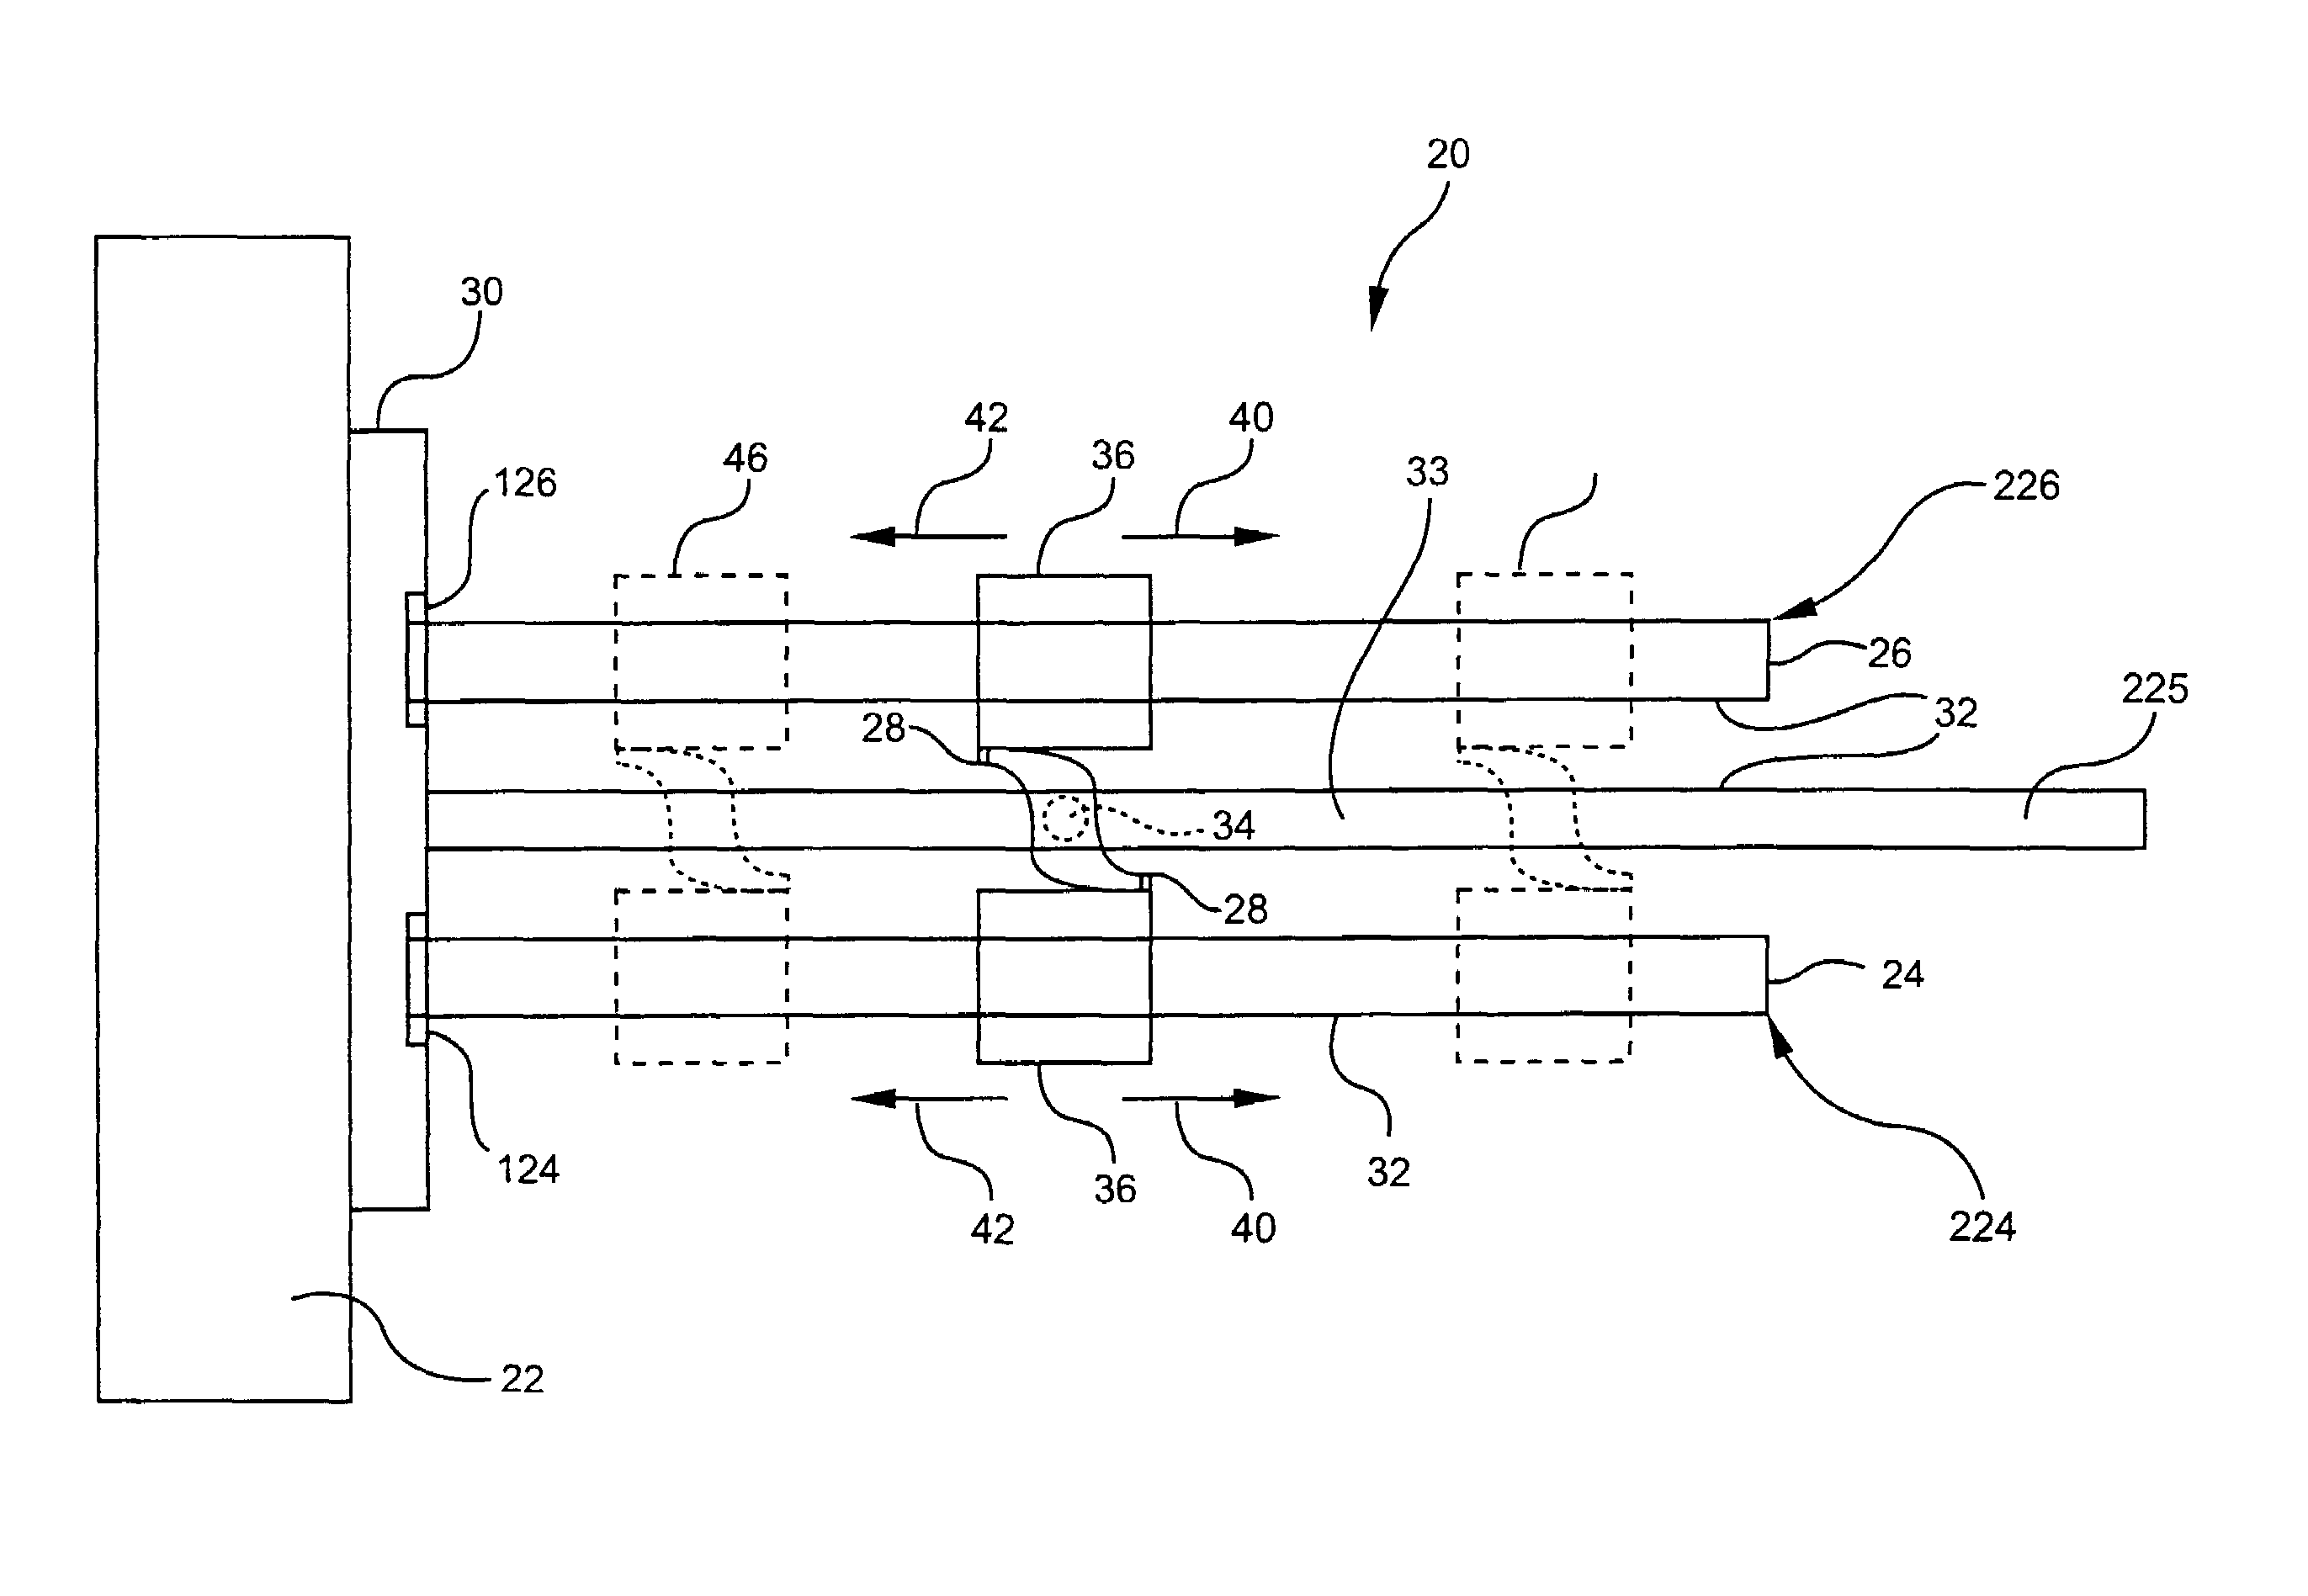 Self-tuning vibration absorber system and method of absorbing varying frequency vehicle vibrations